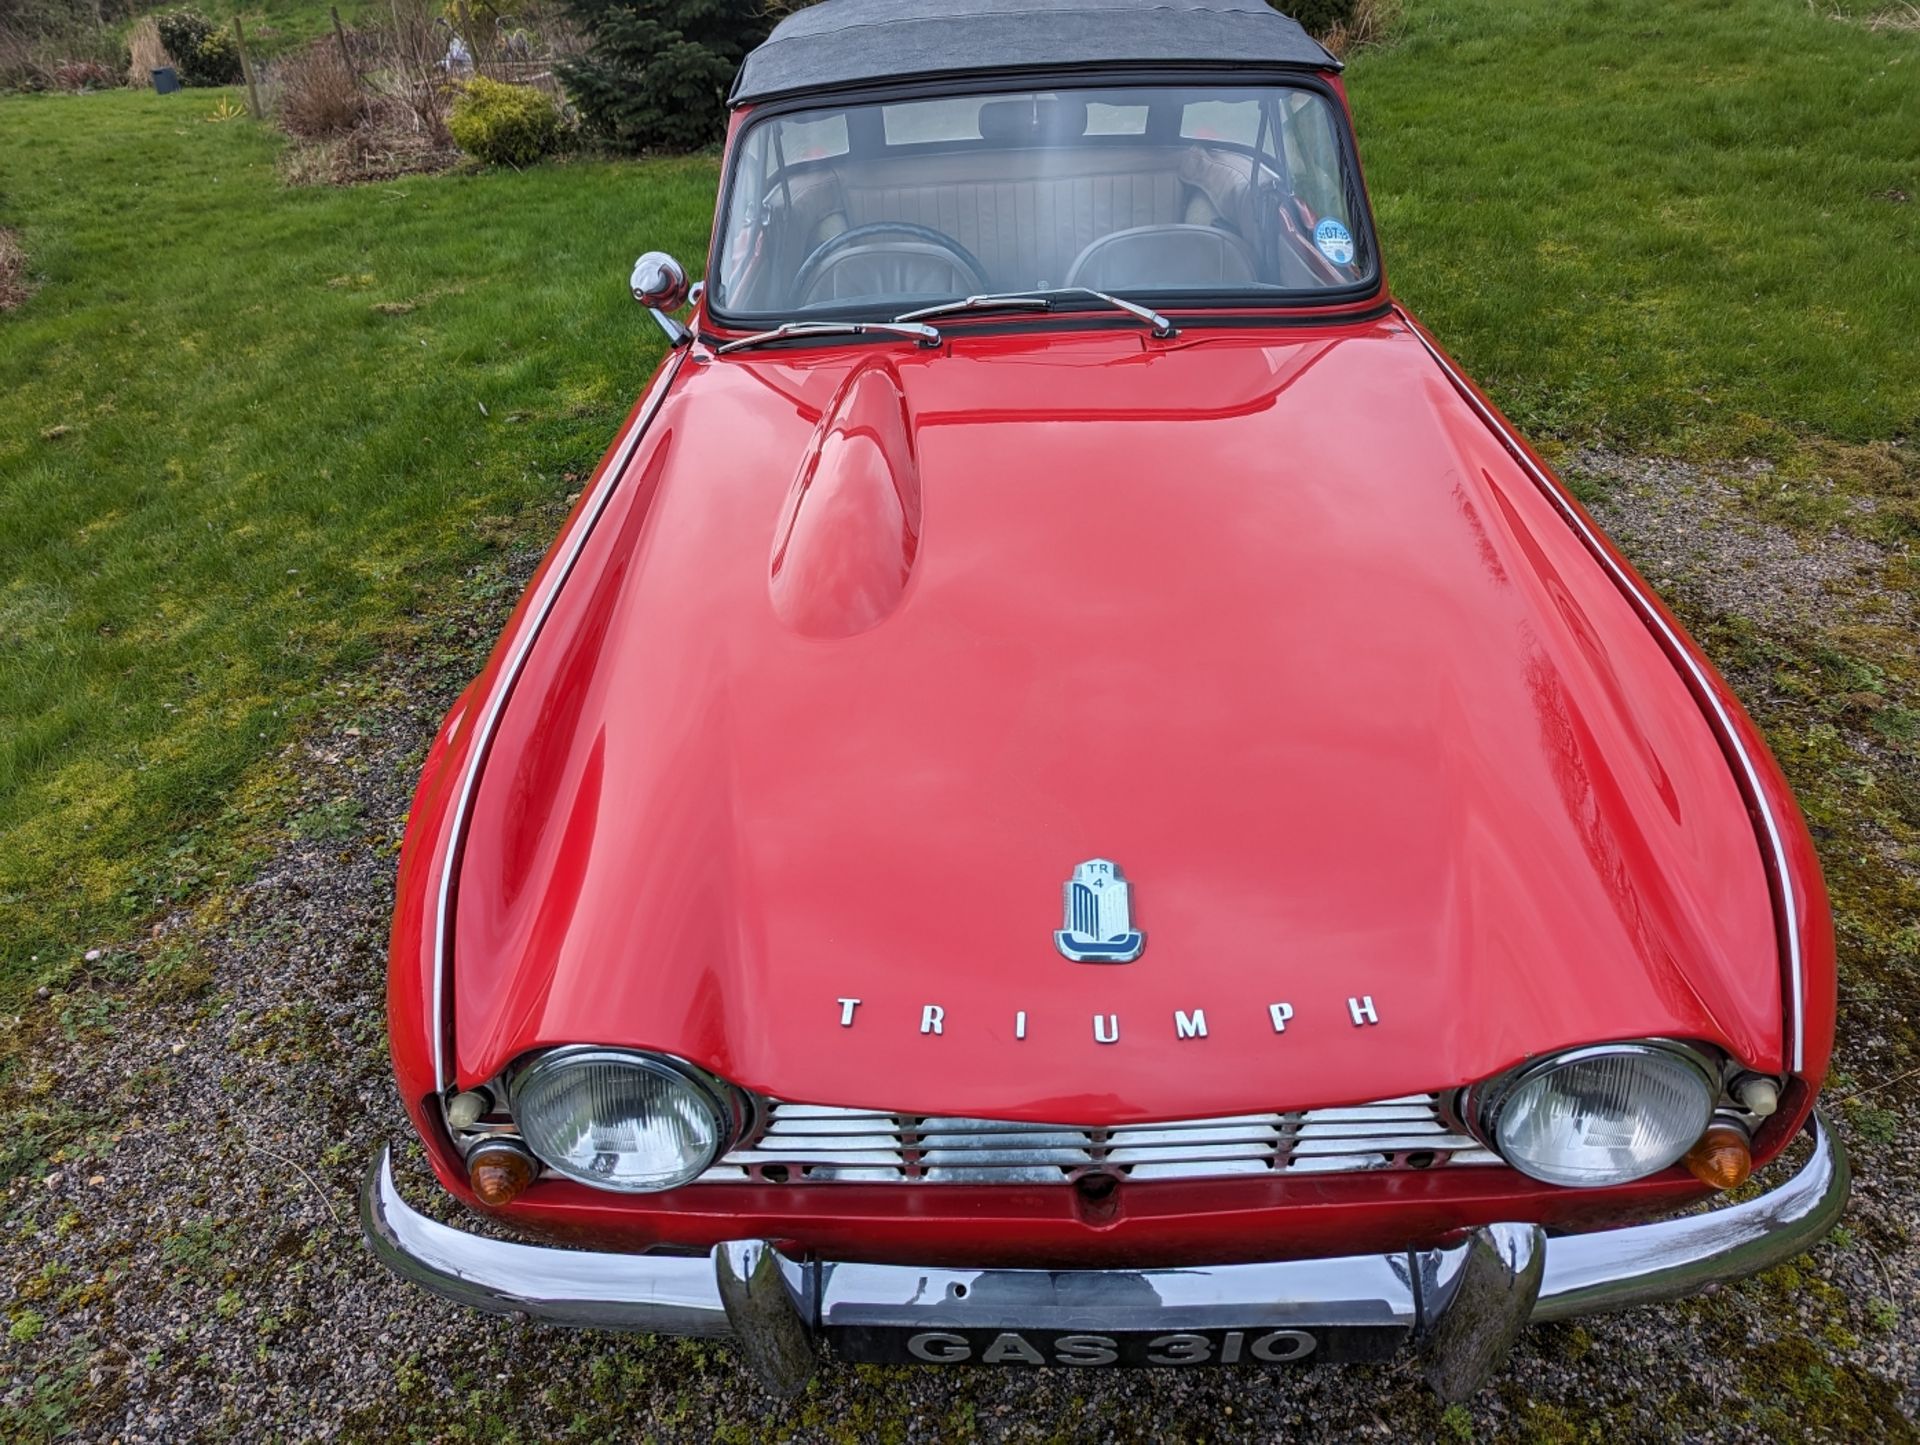 1962 Triumph TR4 Registration number GAS 310 Red with a tan interior Imported from South Africa - Image 3 of 8